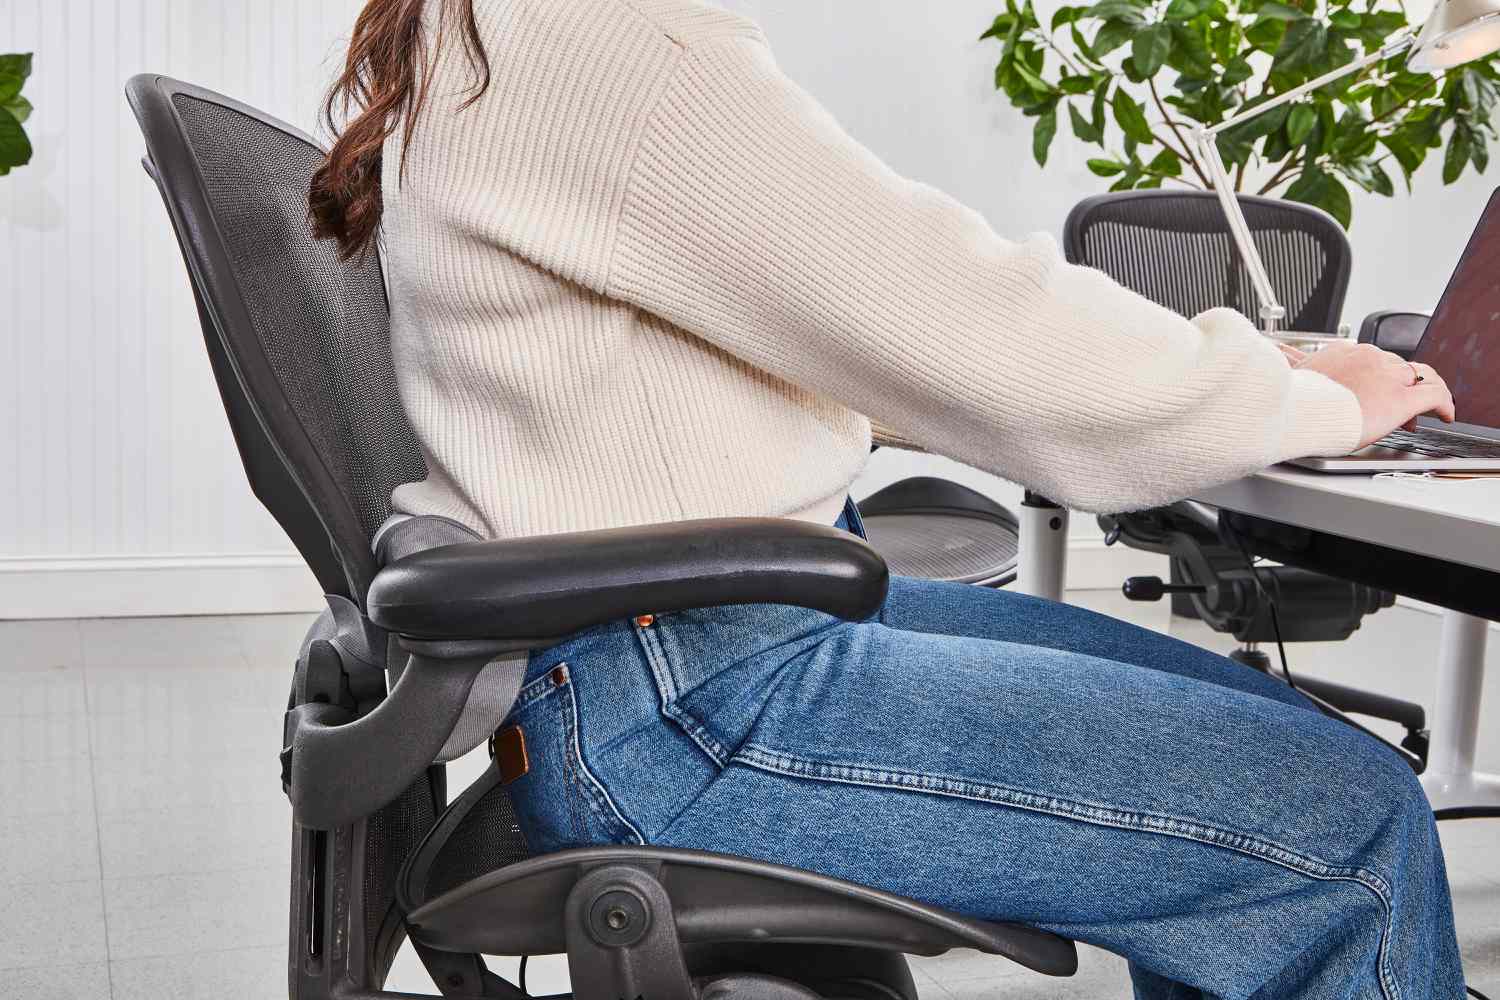 What are the key features to consider when selecting an orthopedic seat cushion for sciatica?